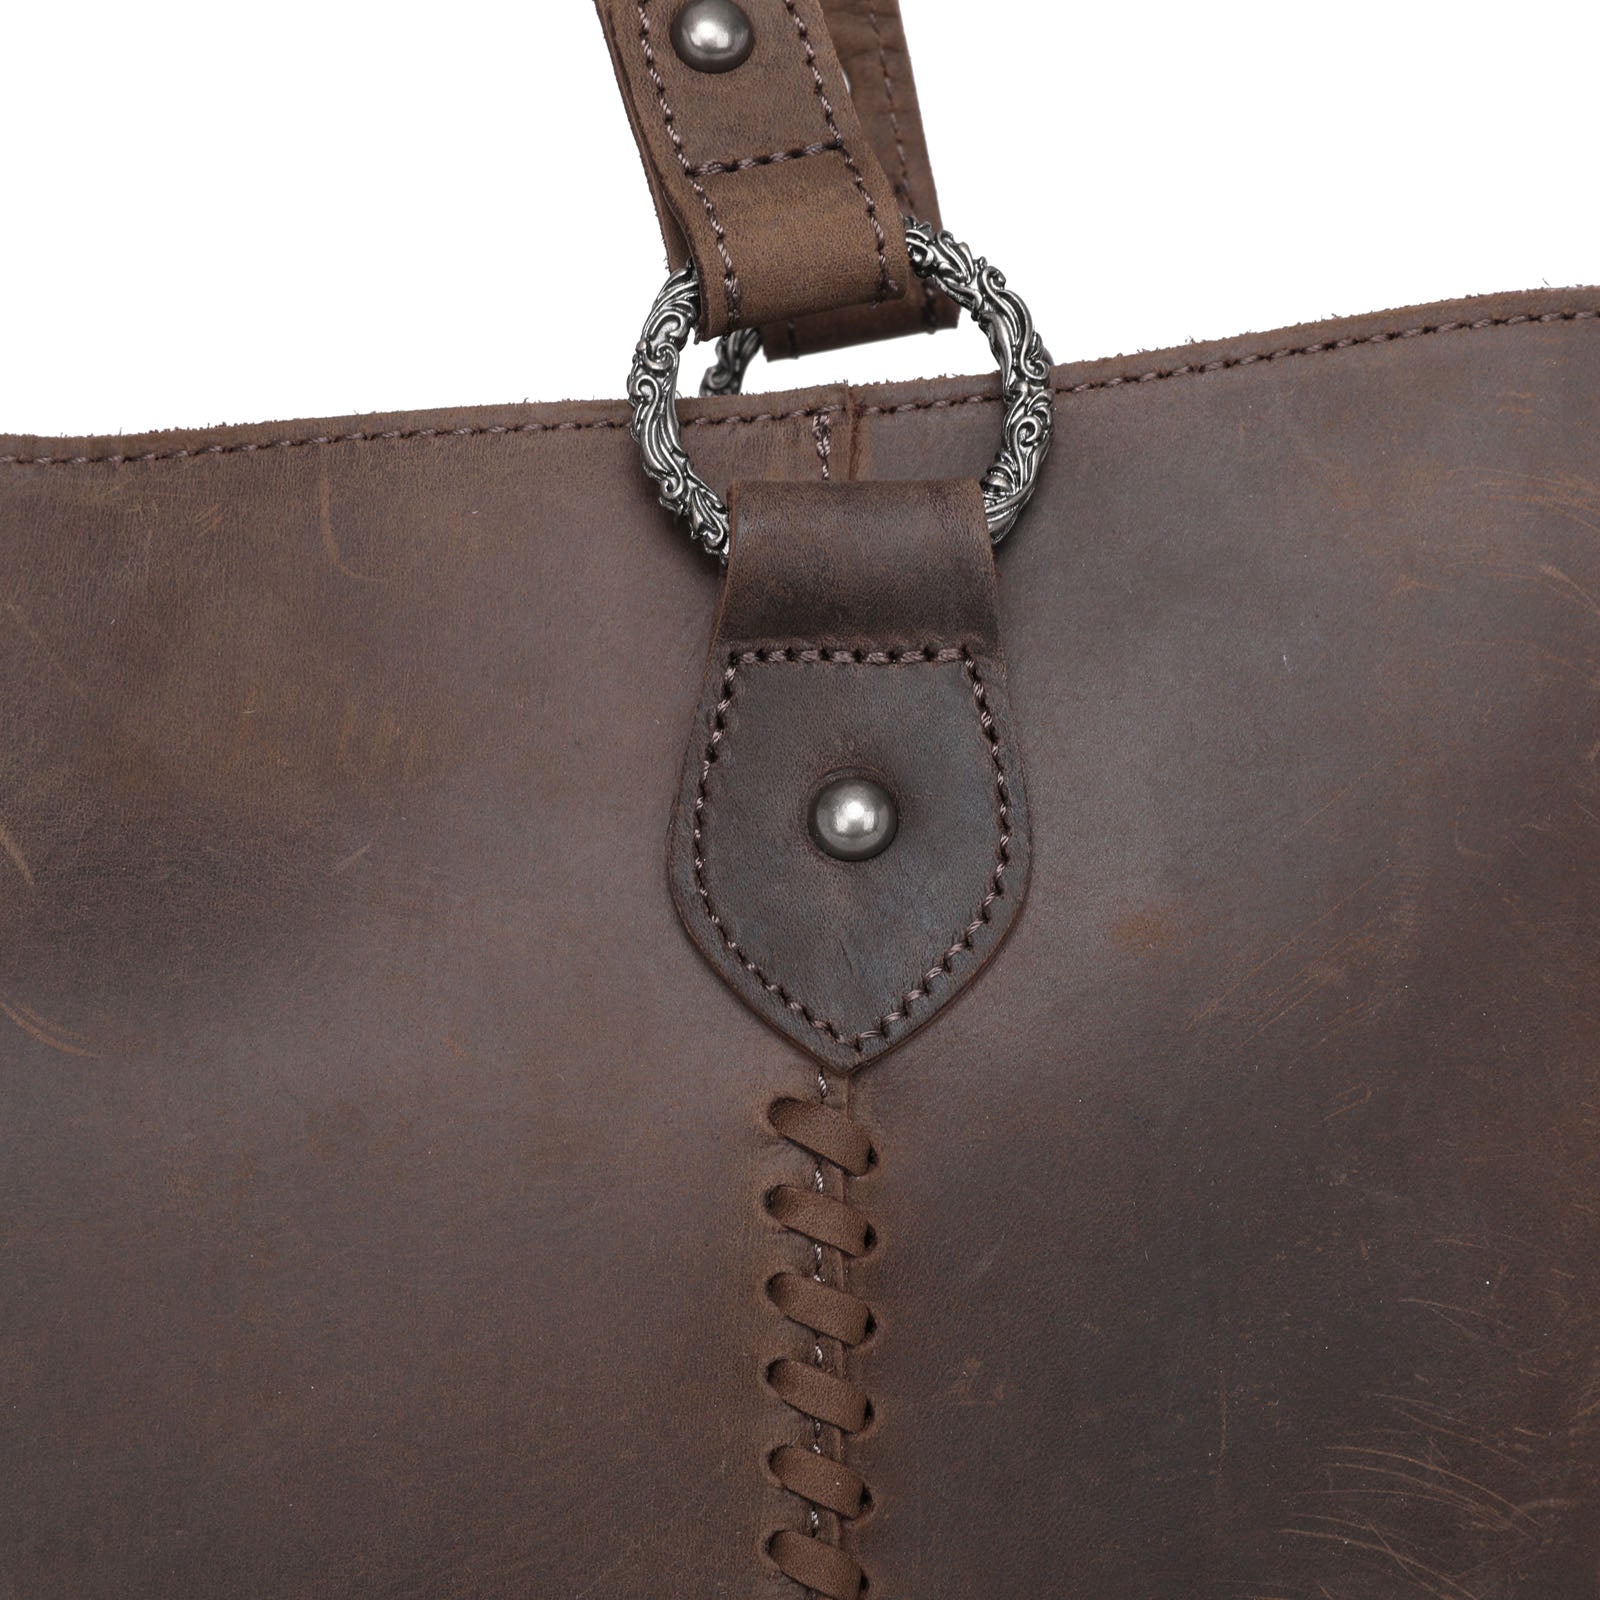 Montana West Genuine Leather Concealed Carry Tote Handbag For Women - Cowgirl Wear